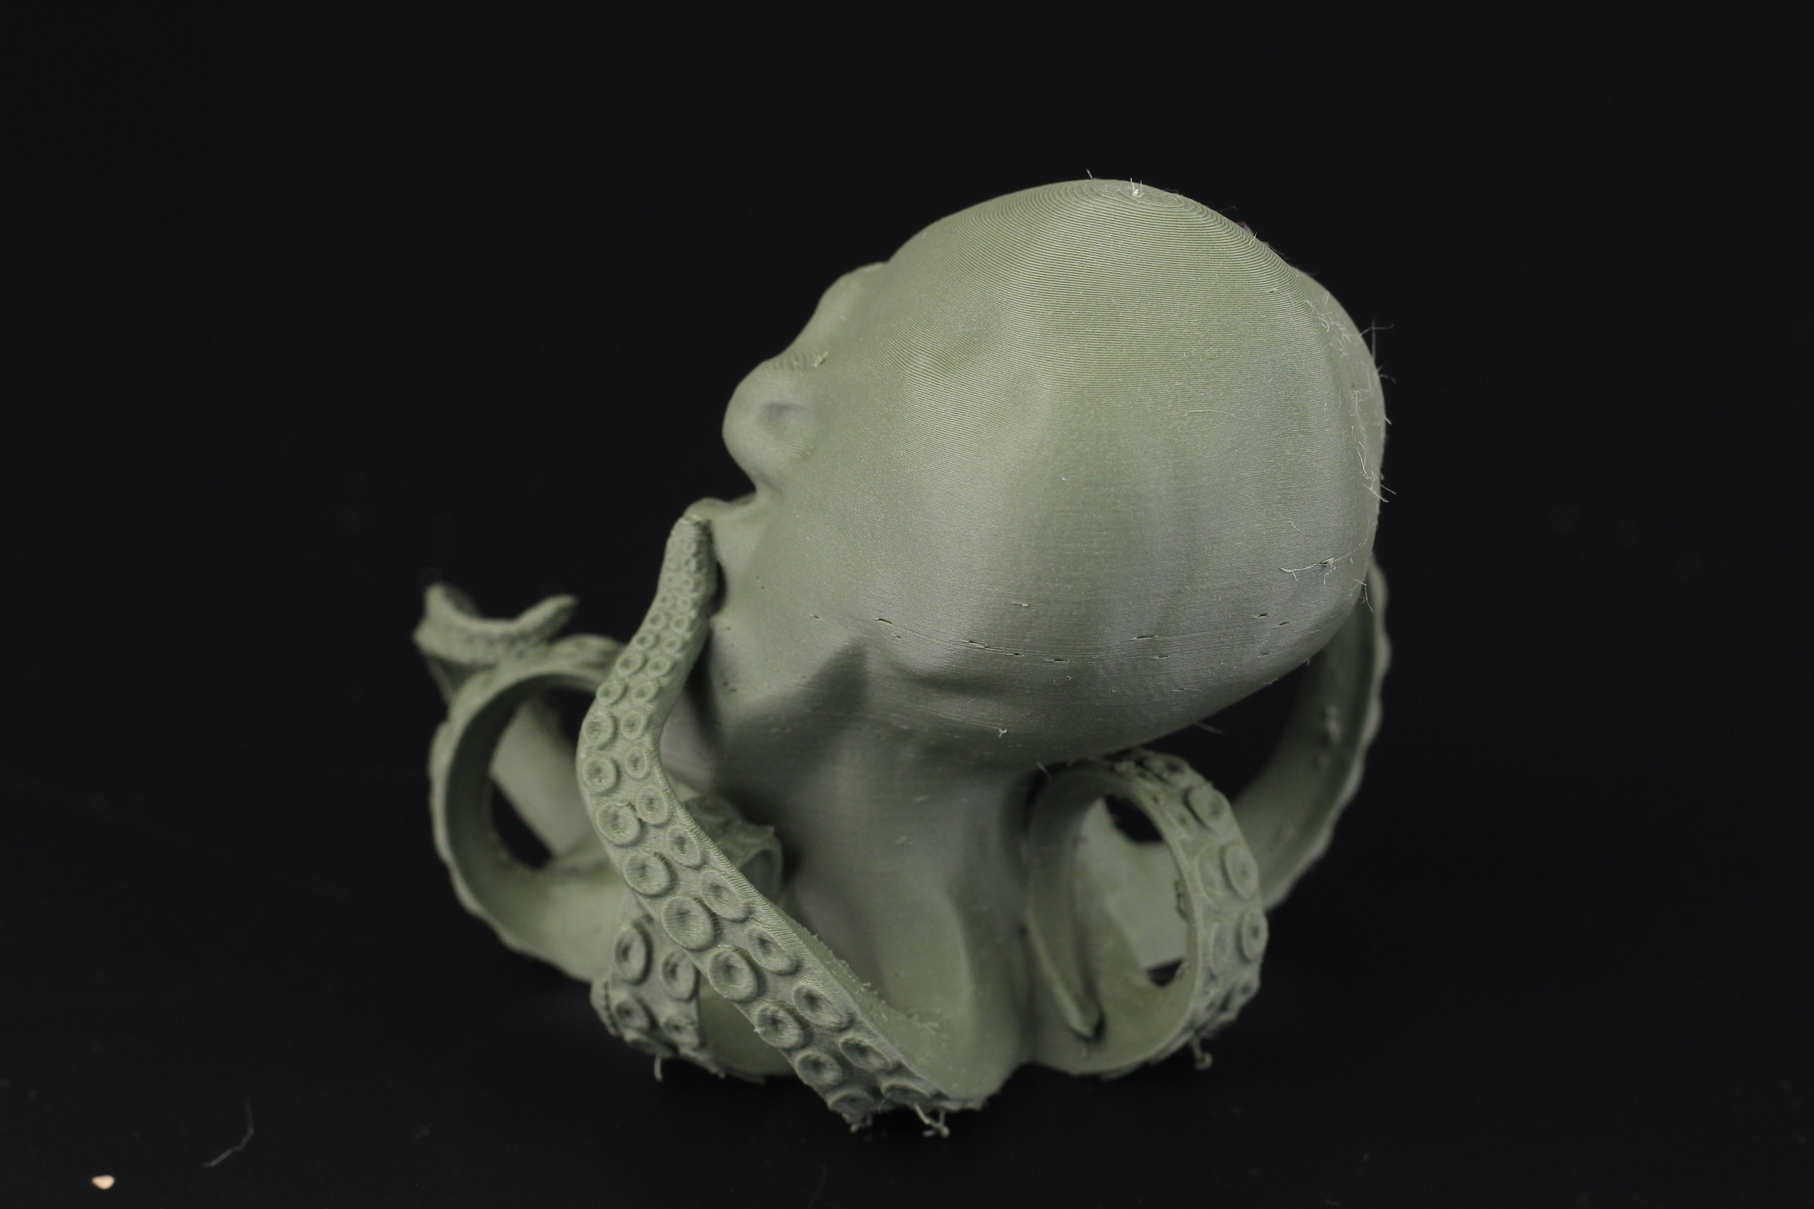 Cthulu printed on BIQU B1 SE PLUS 2 | BIQU B1 SE PLUS Review: SKR 2 and ABL from Factory